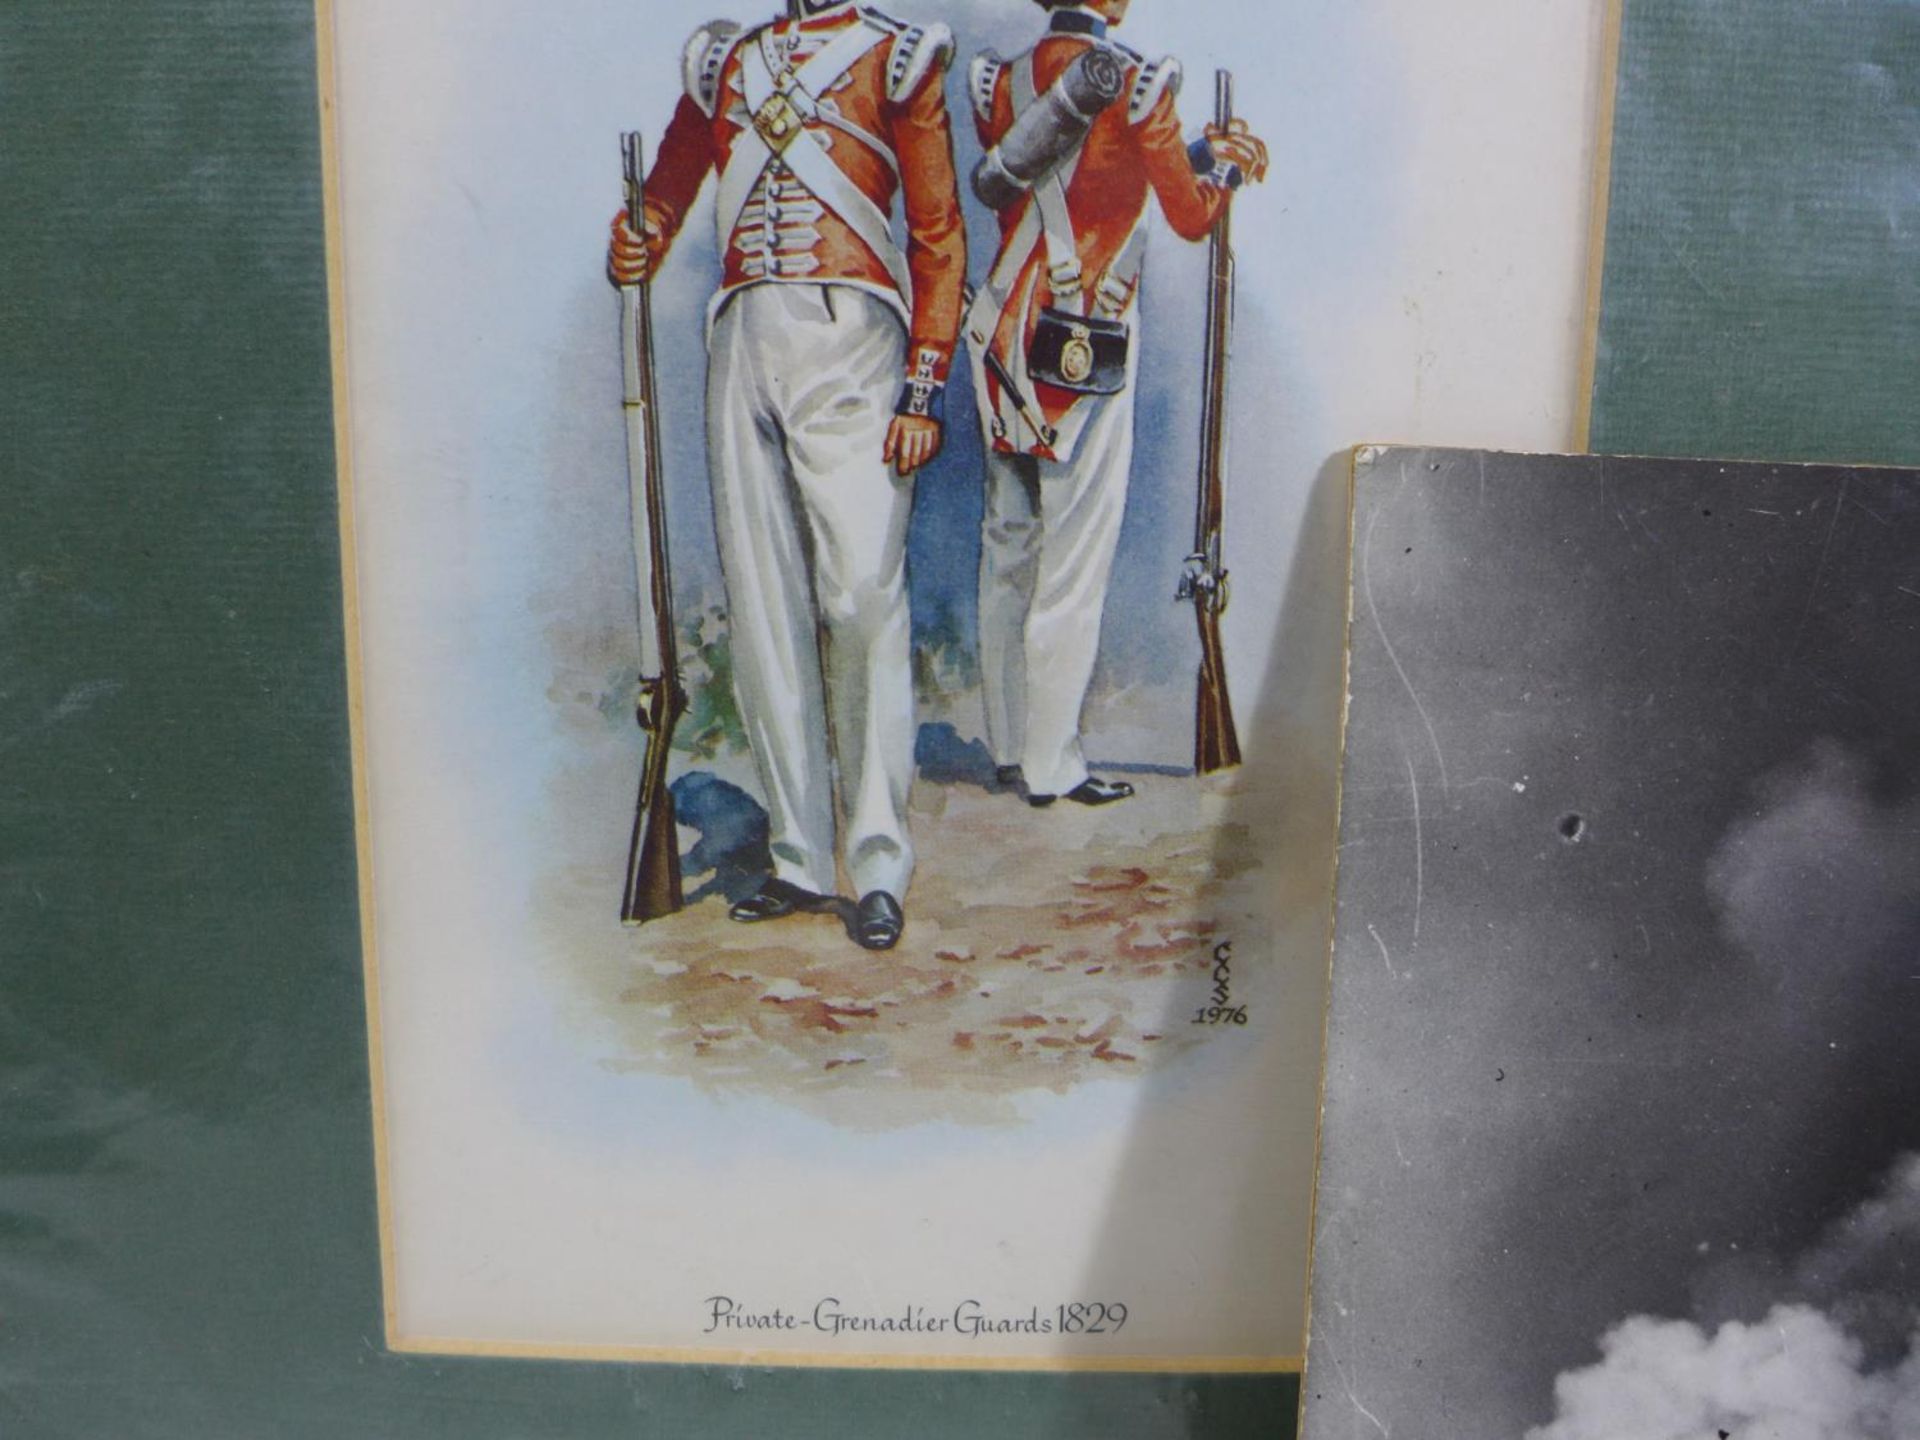 TWO MOUNTED COLOURED PRINTS OF LIFEGUARDS AND THE GRENADIER GUARDS, AND A BLACK AND WHITE PHOTO OF - Image 3 of 5